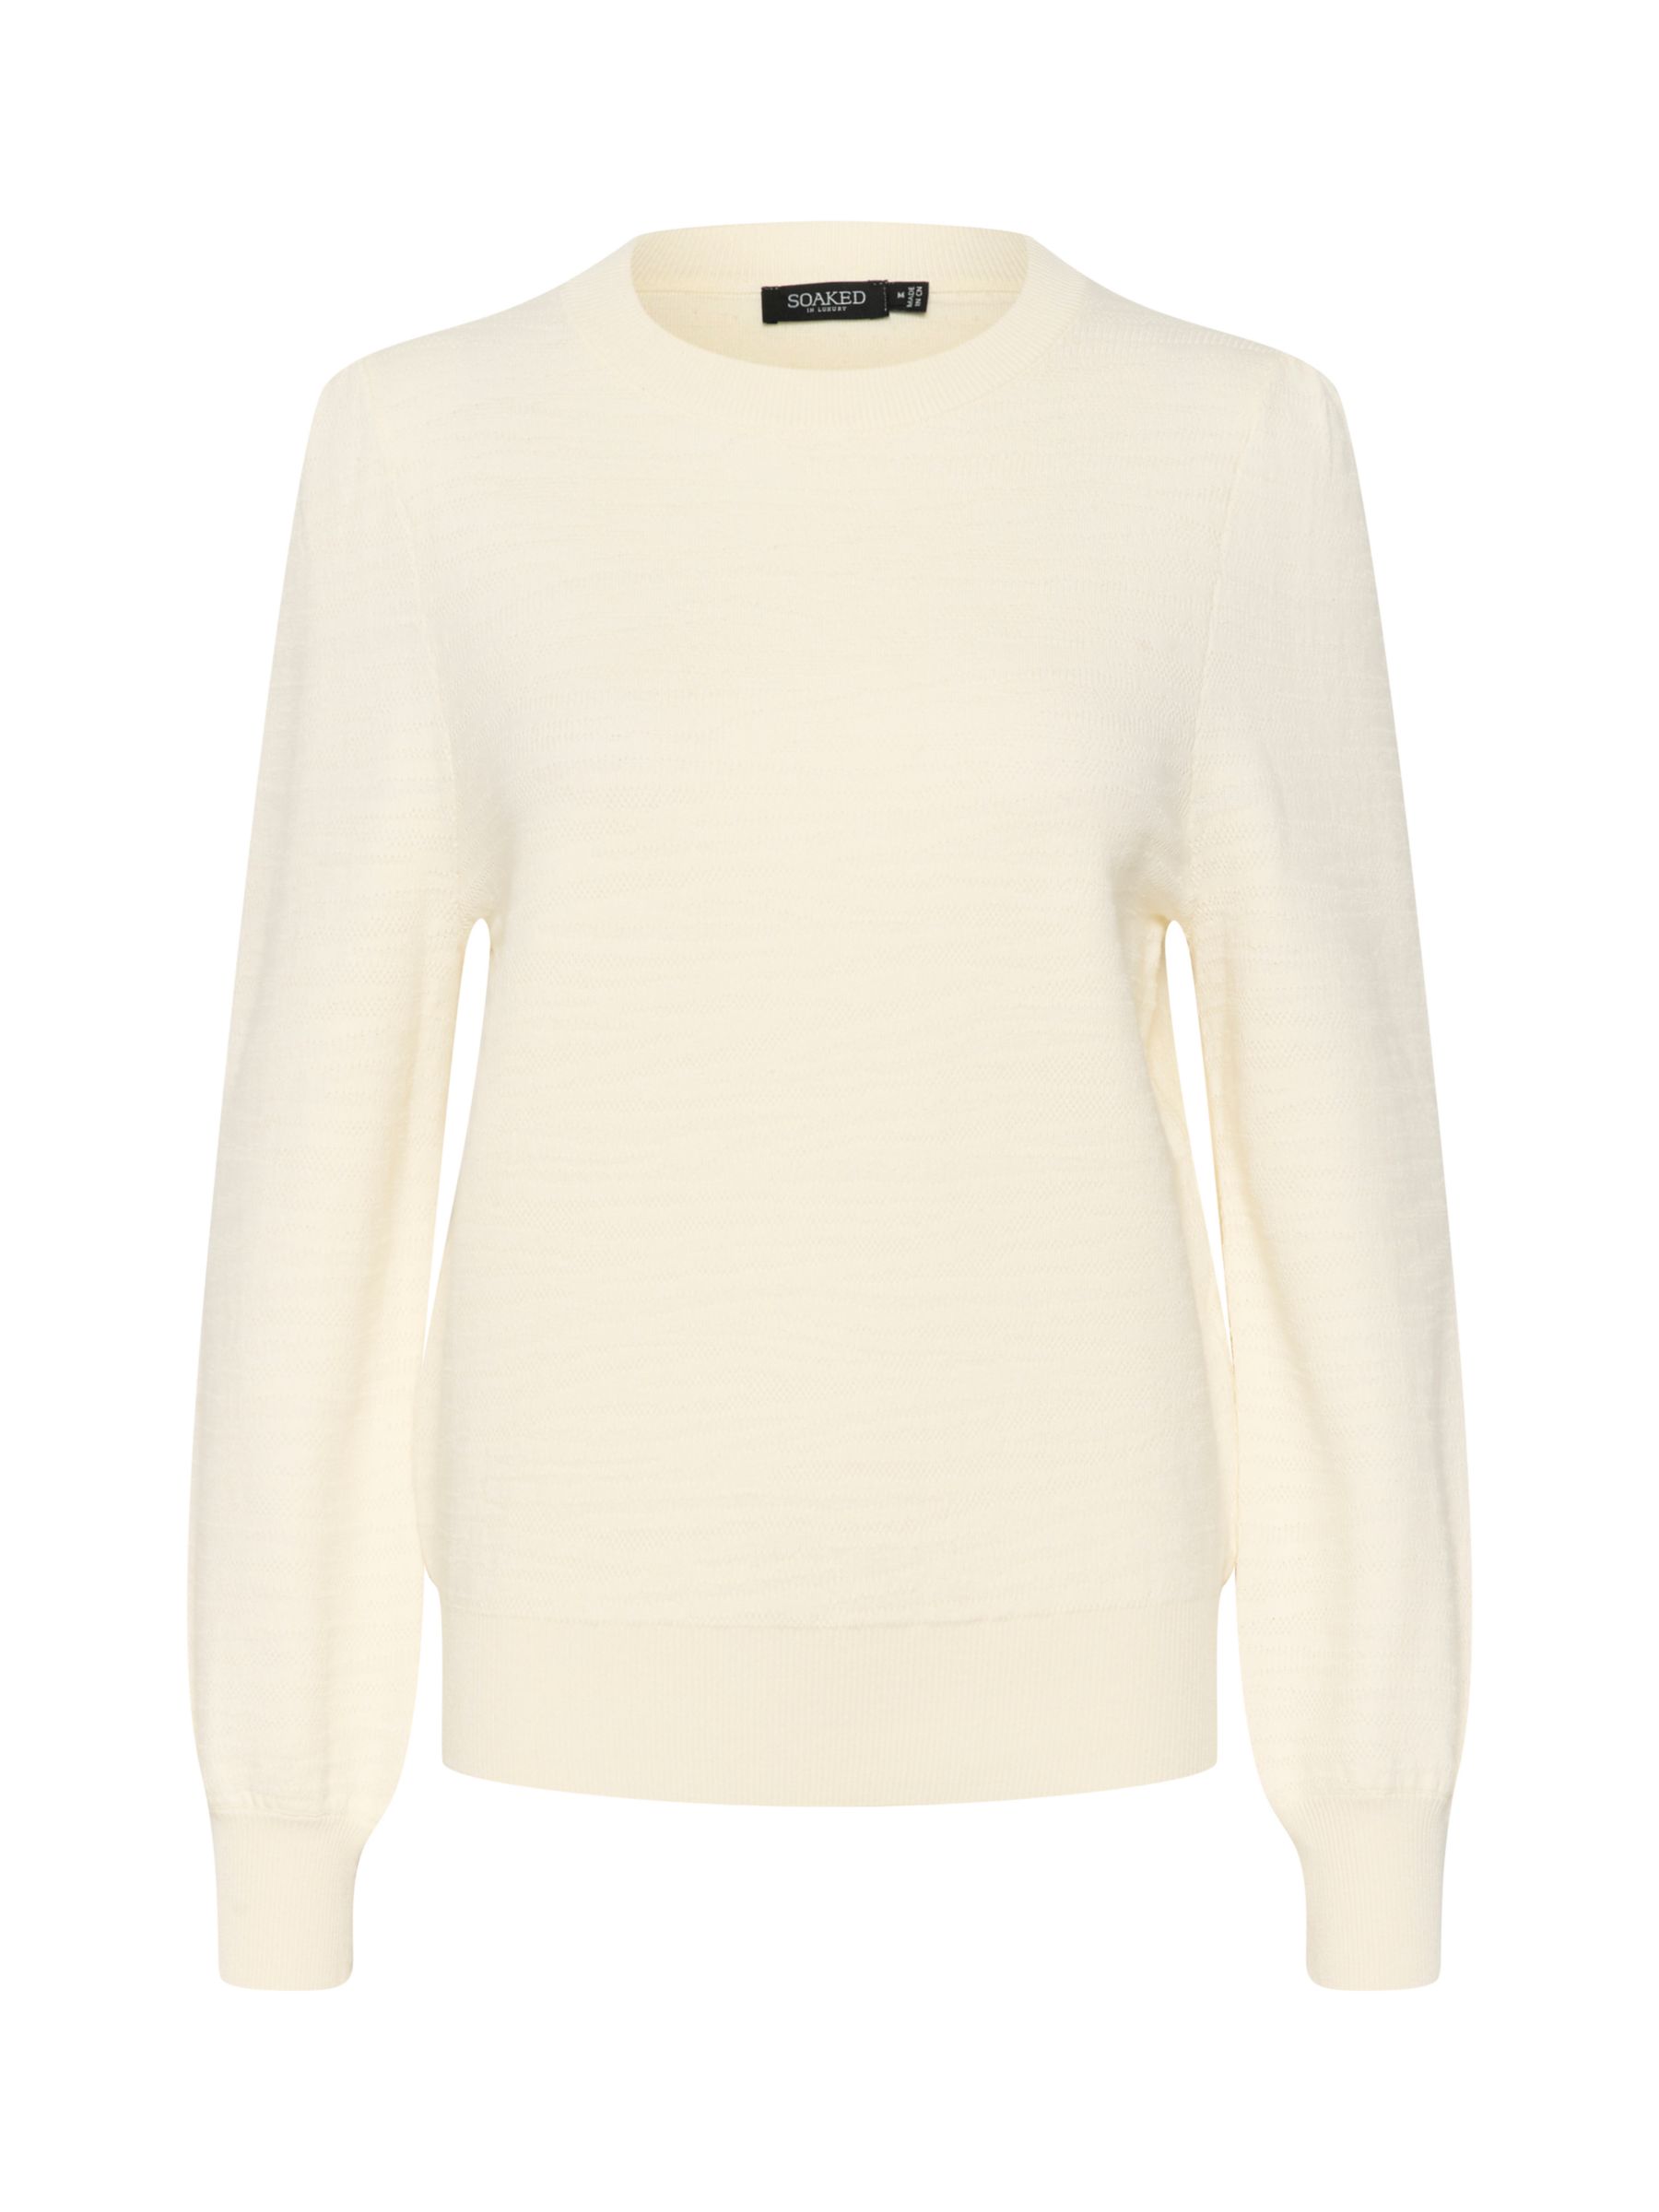 Soaked In Luxury Pipa Jumper, Whisper White at John Lewis & Partners